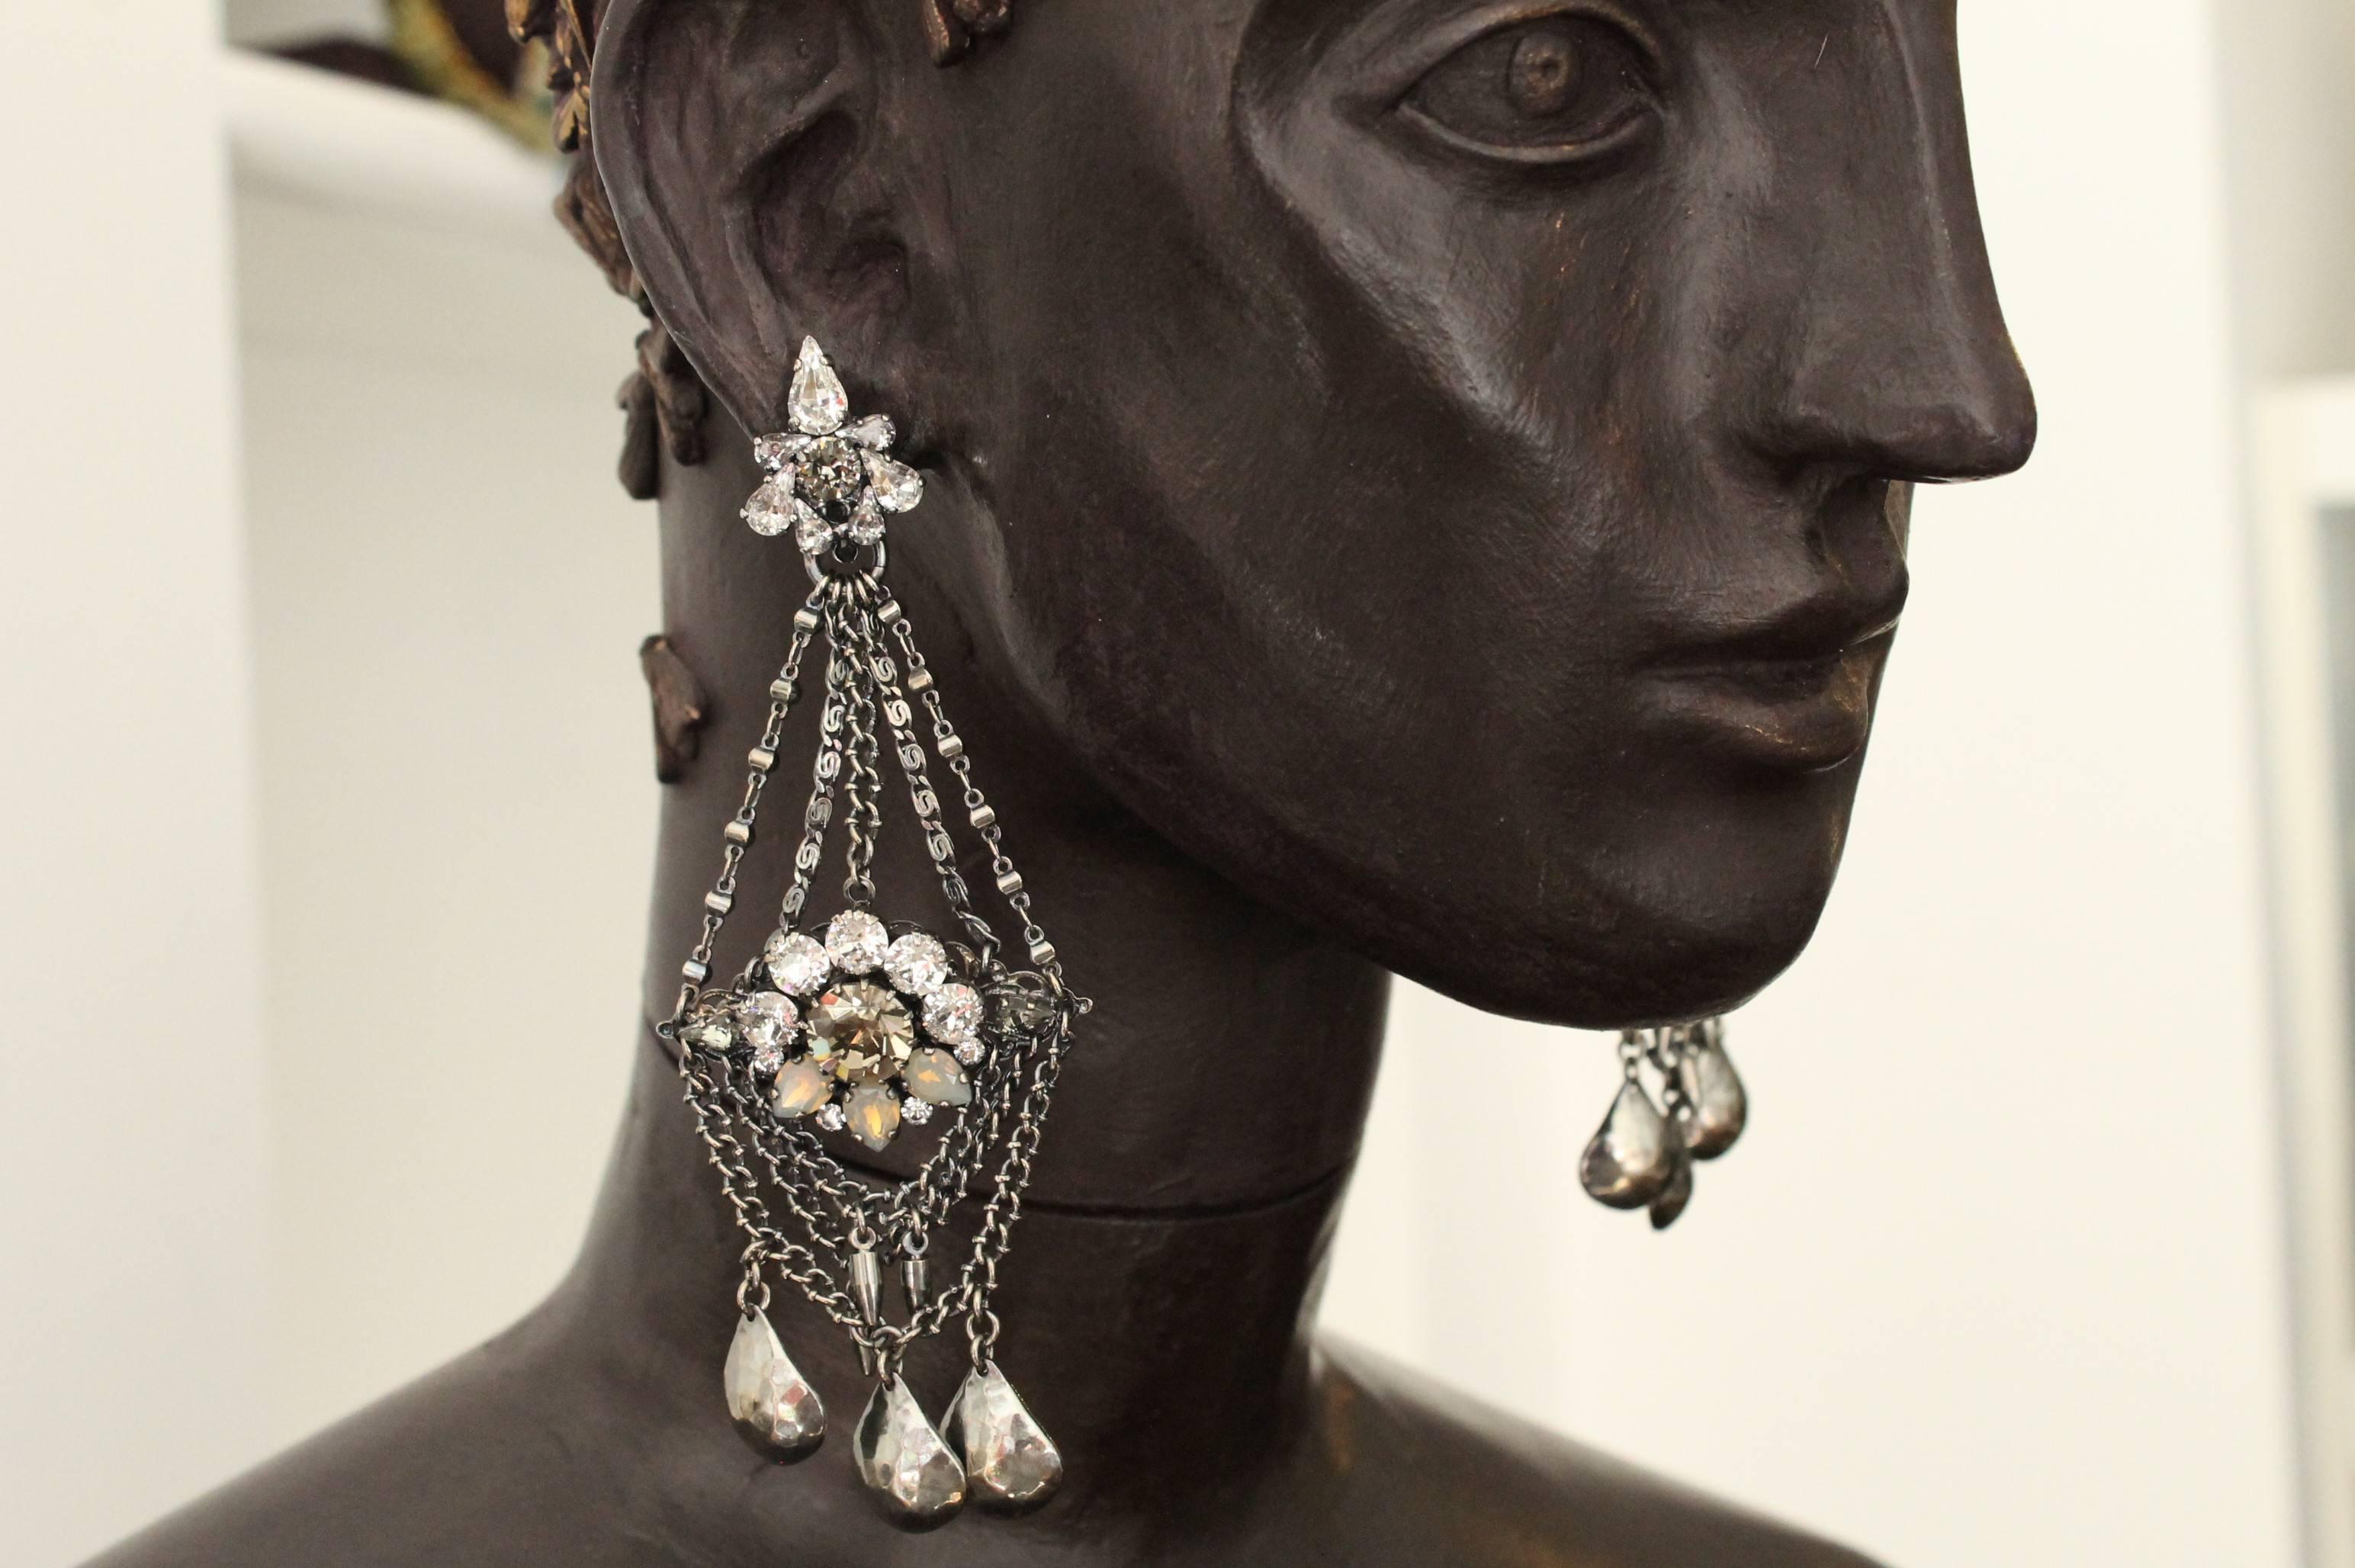 Elegant statement antique silver-plated earrings featuring gorgeous, sparkling Swarovski crystals in a beautiful neutral palette. 

Handmade for the past 25 years by Vicki’s small team of artisans, in the brand’s Belgravia studios which lie beneath